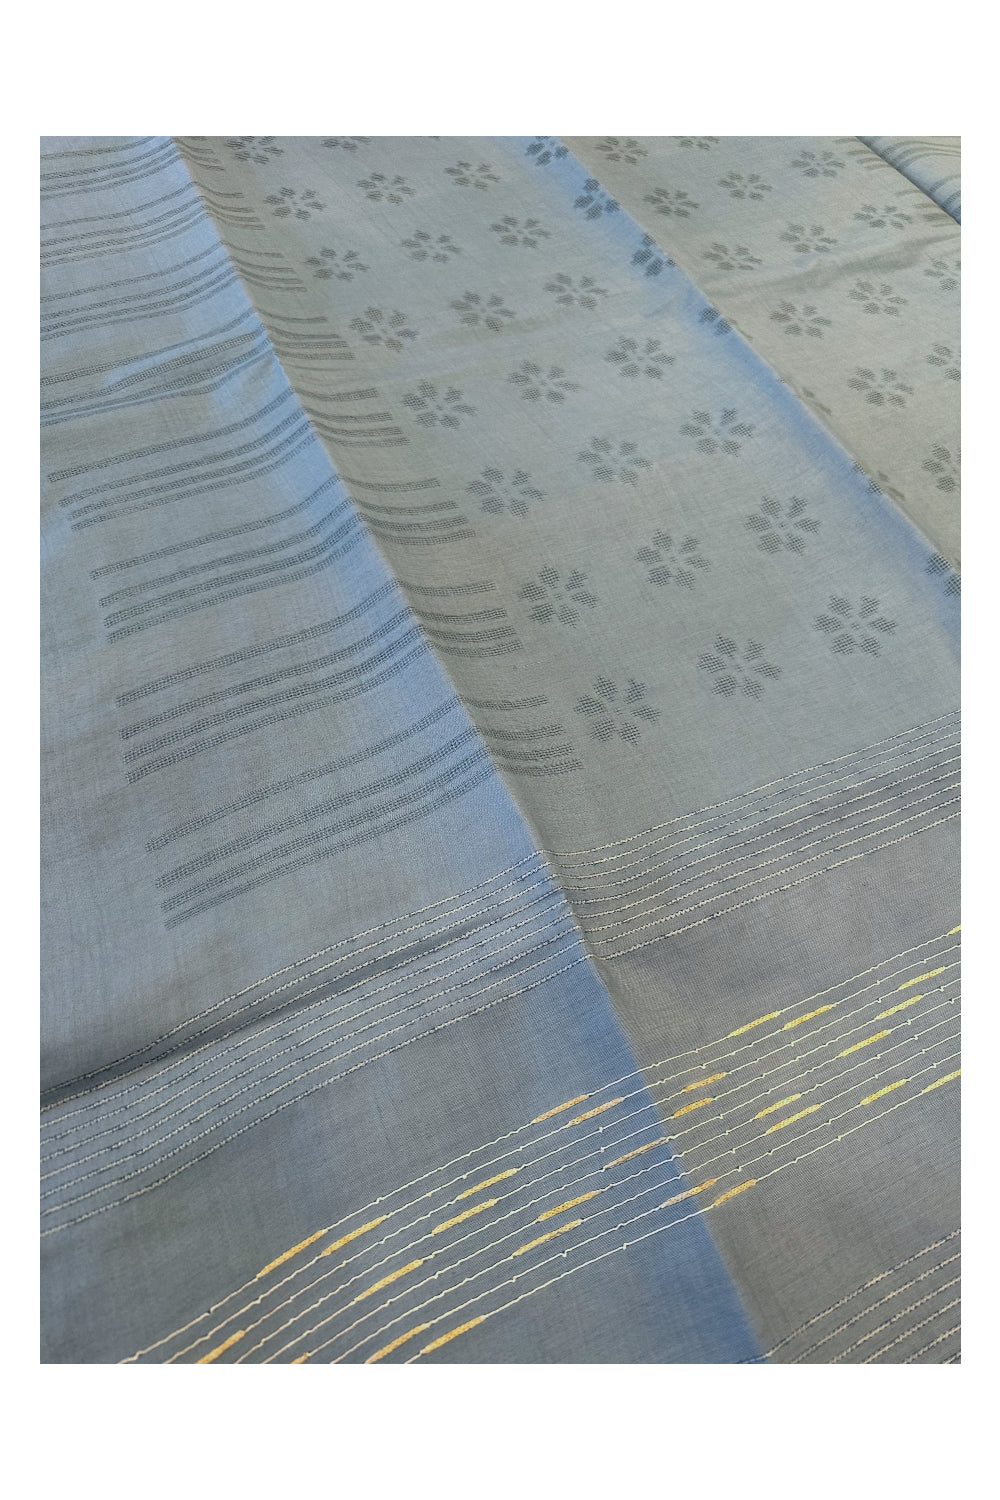 Southloom Pure Tussar Saree with Plain Body and Blouse Piece in Blueish Grey